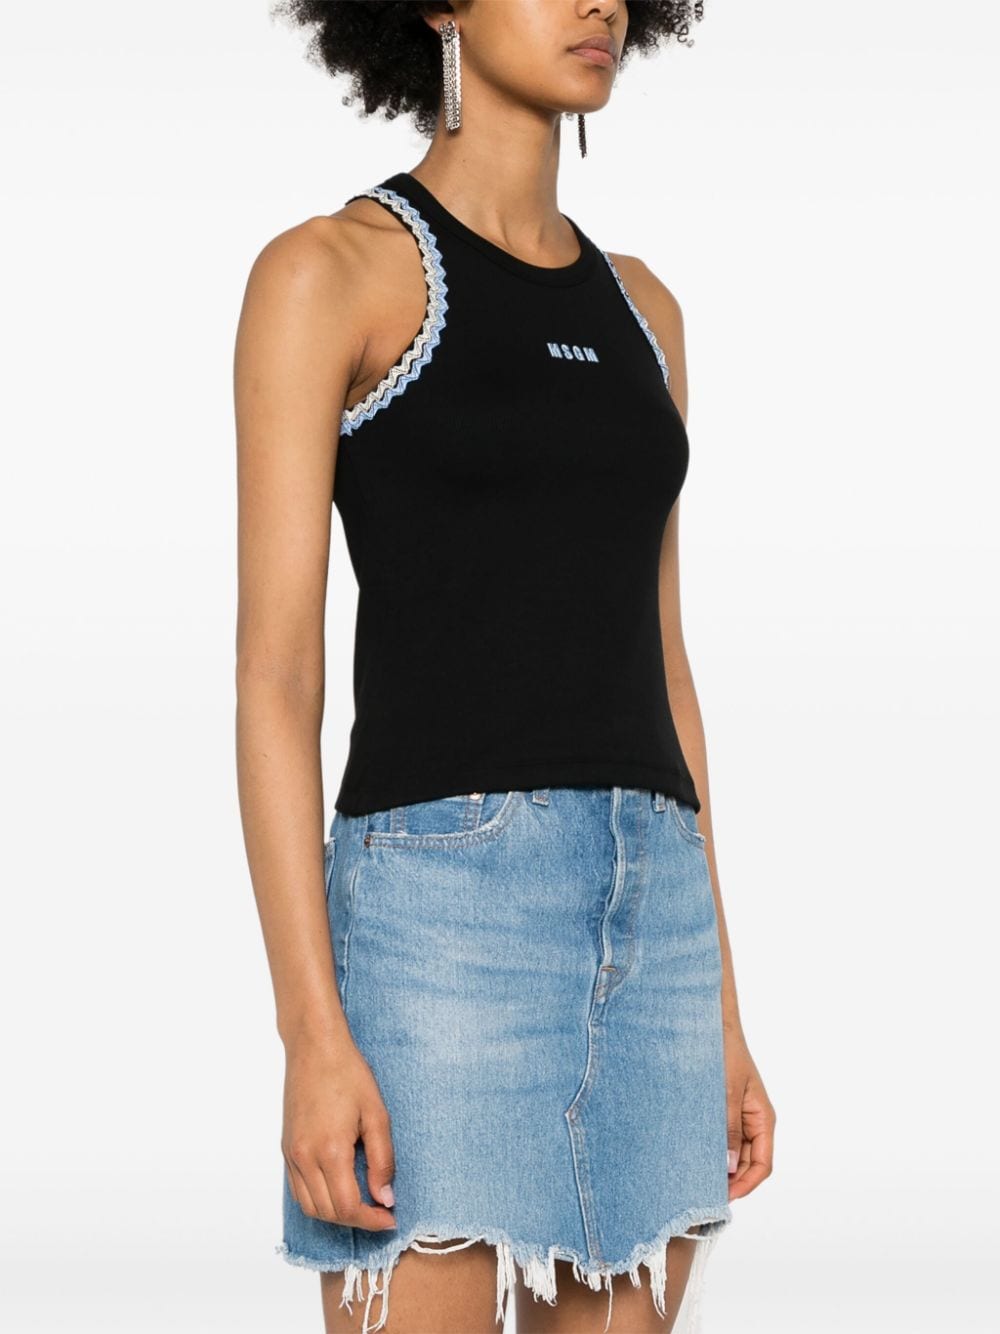 LOGO-EMBROIDERED TANK TOP